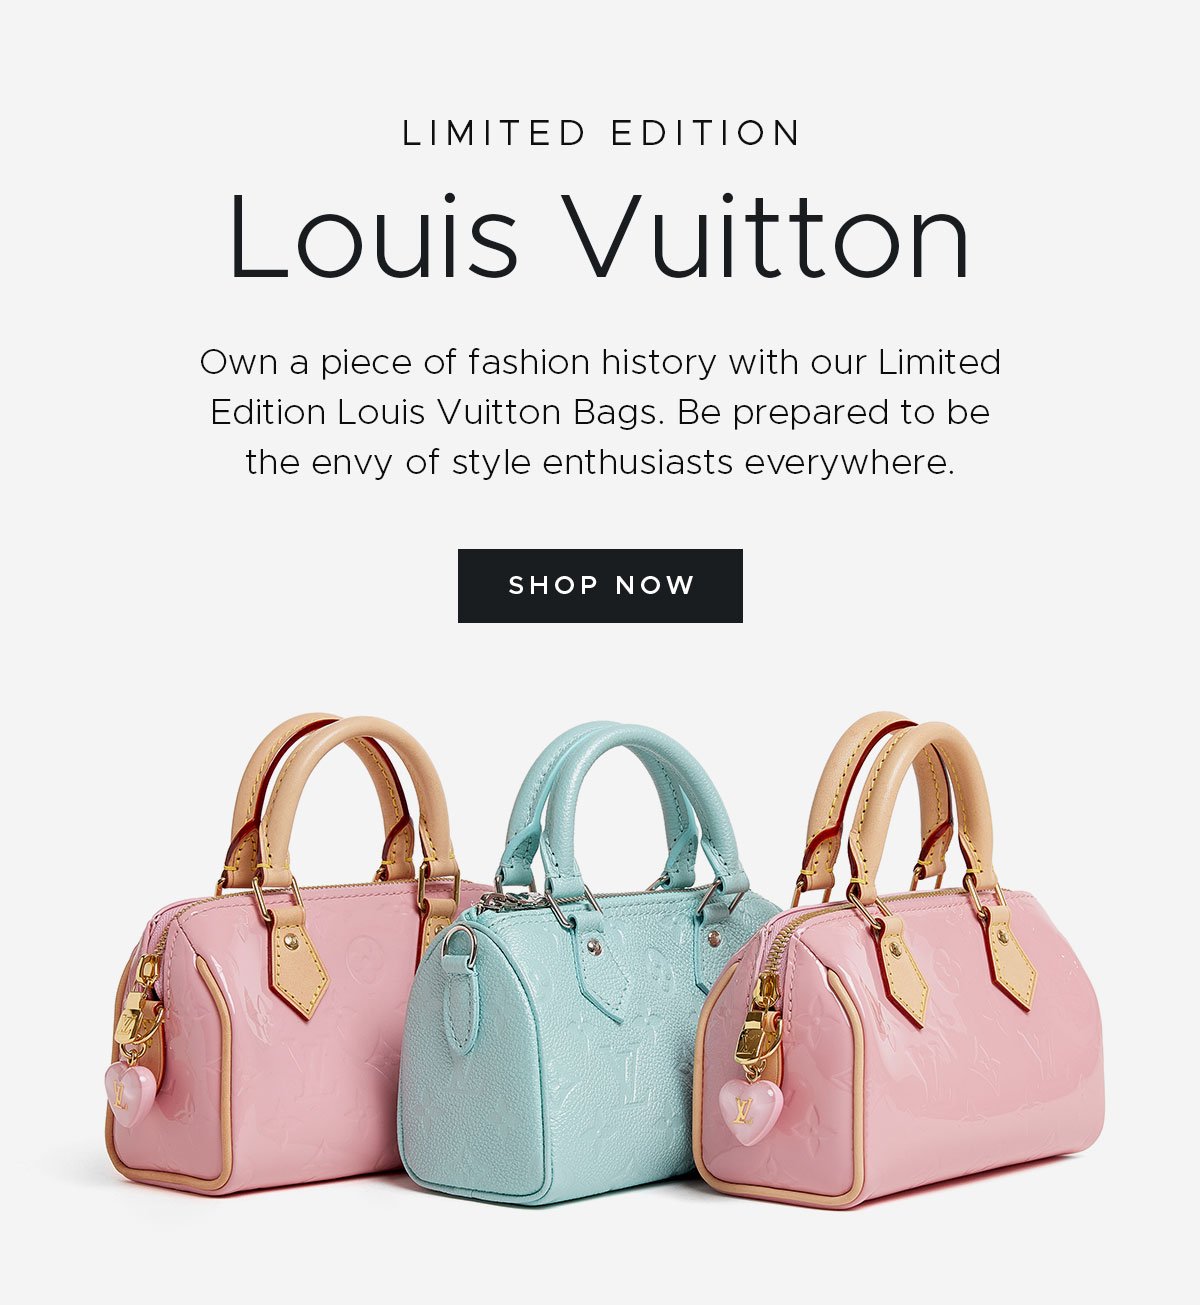 Limited Edition Louis Vuitton